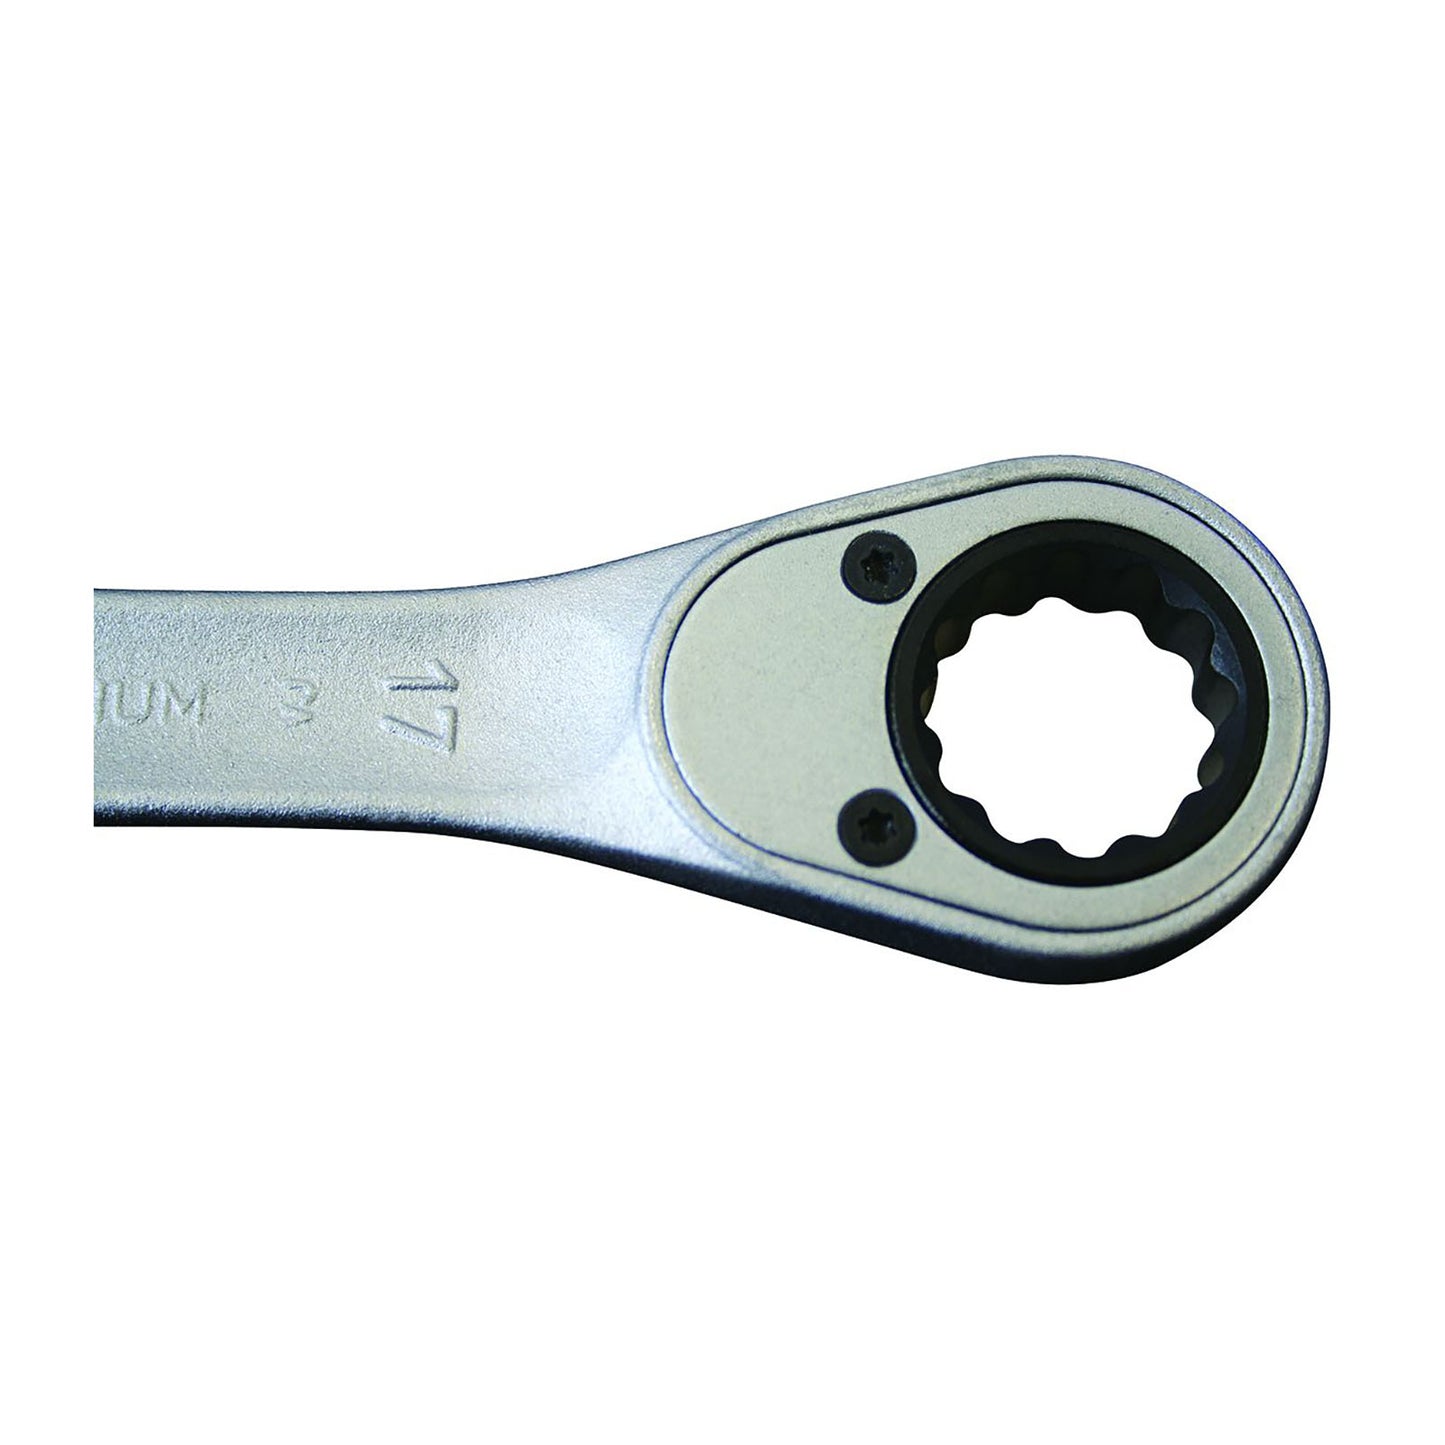 GEDORE 7 R 17 - Ratchet combination wrench, 17mm (2297159)